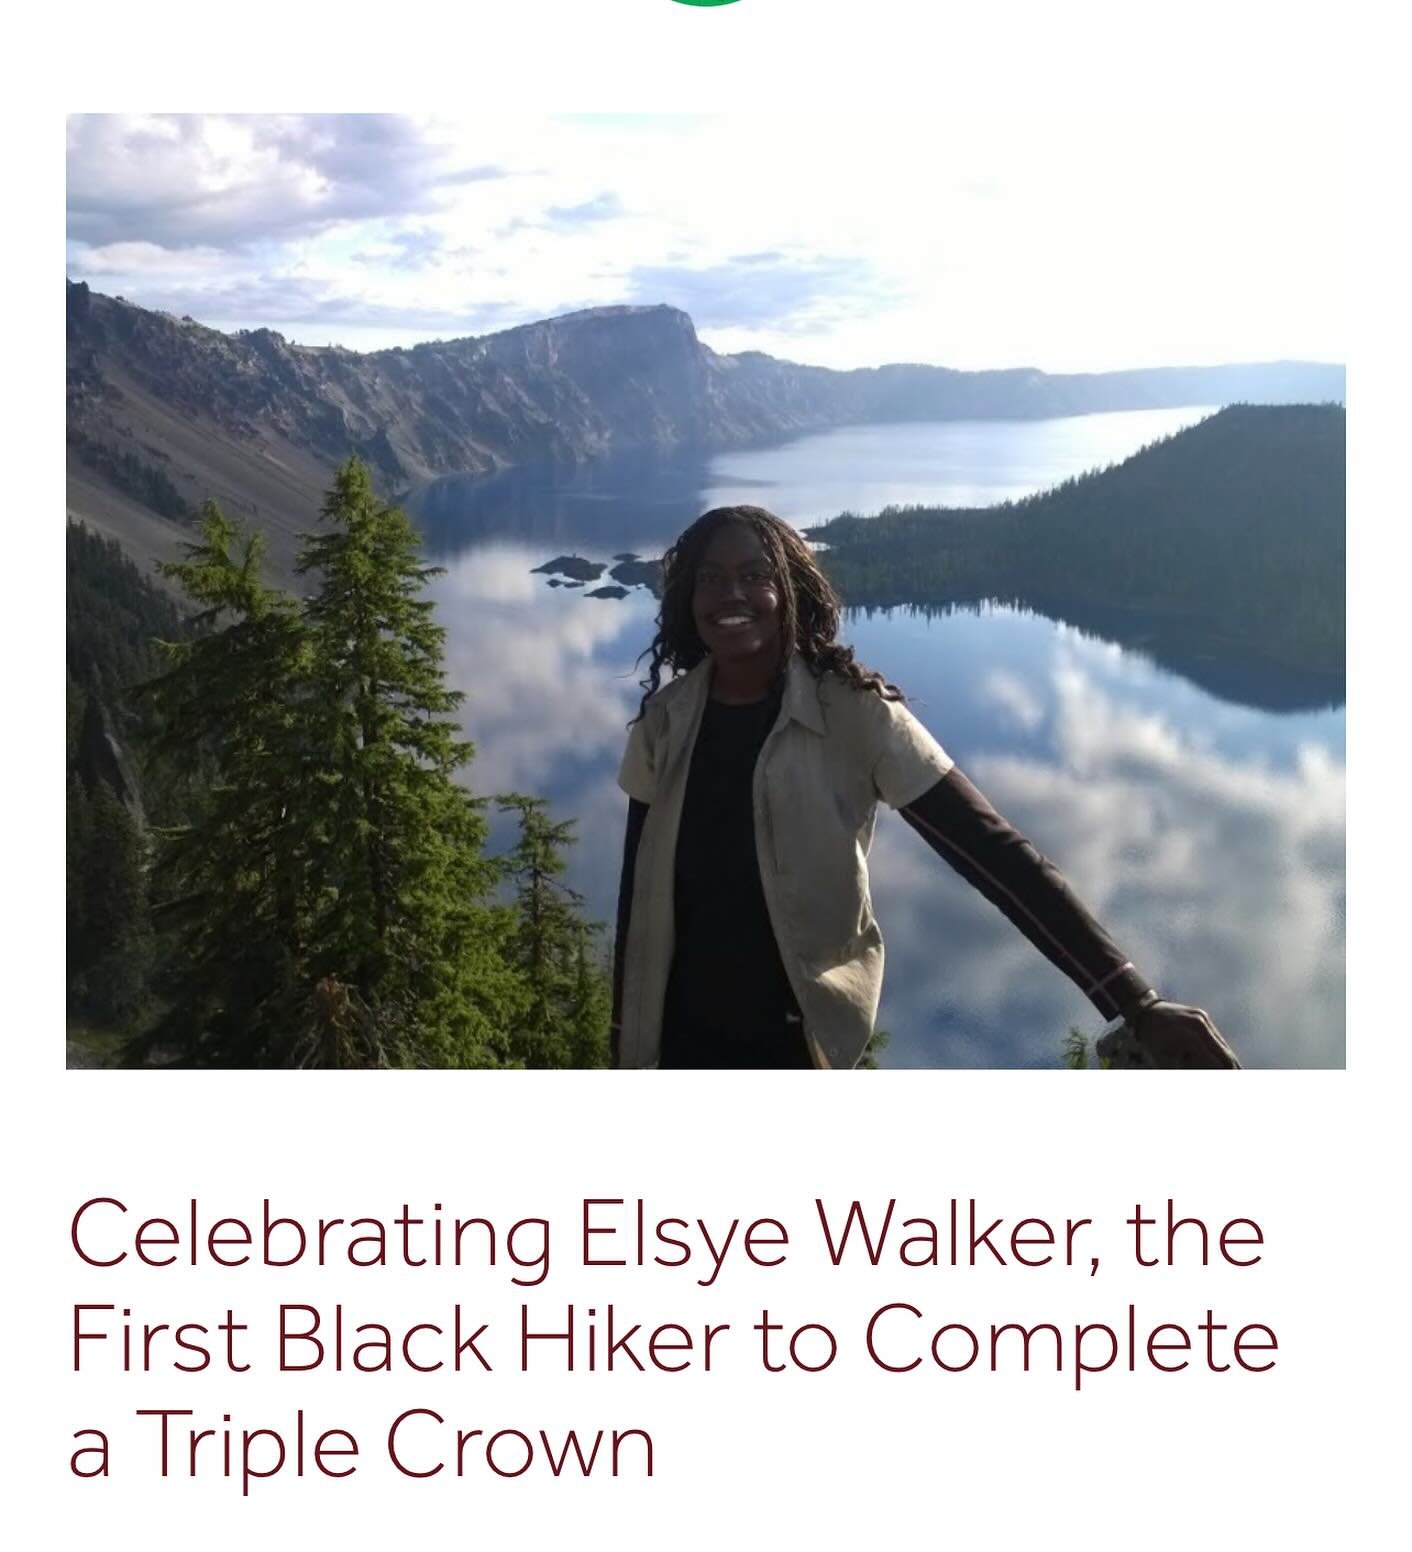 On the morning of July 13, 2018, Elsye &ldquo;Chardonnay&rdquo; Walker reached the summit of Mount Katahdin and became the first Black person of any gender to complete the Triple Crown of long-distance hiking. It was the culmination of three years an